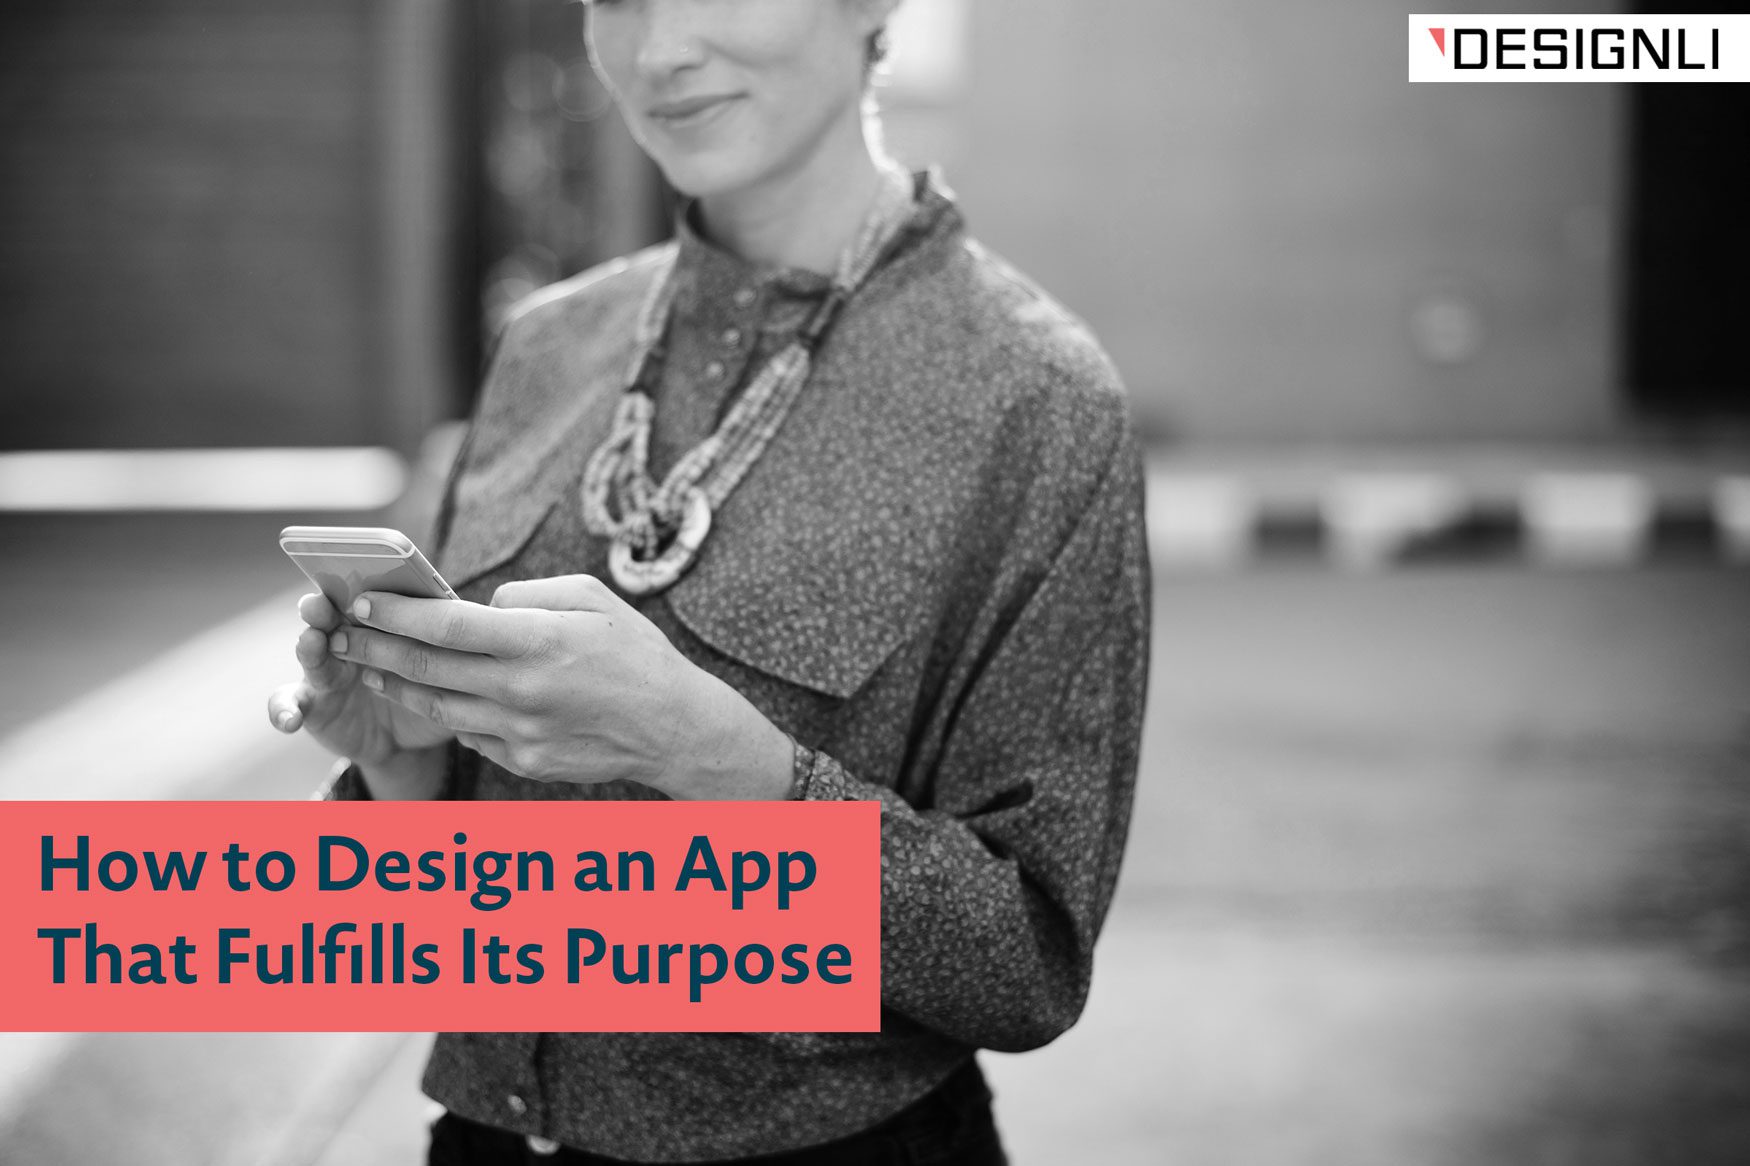 How to Design an App That Fulfills Its Purpose